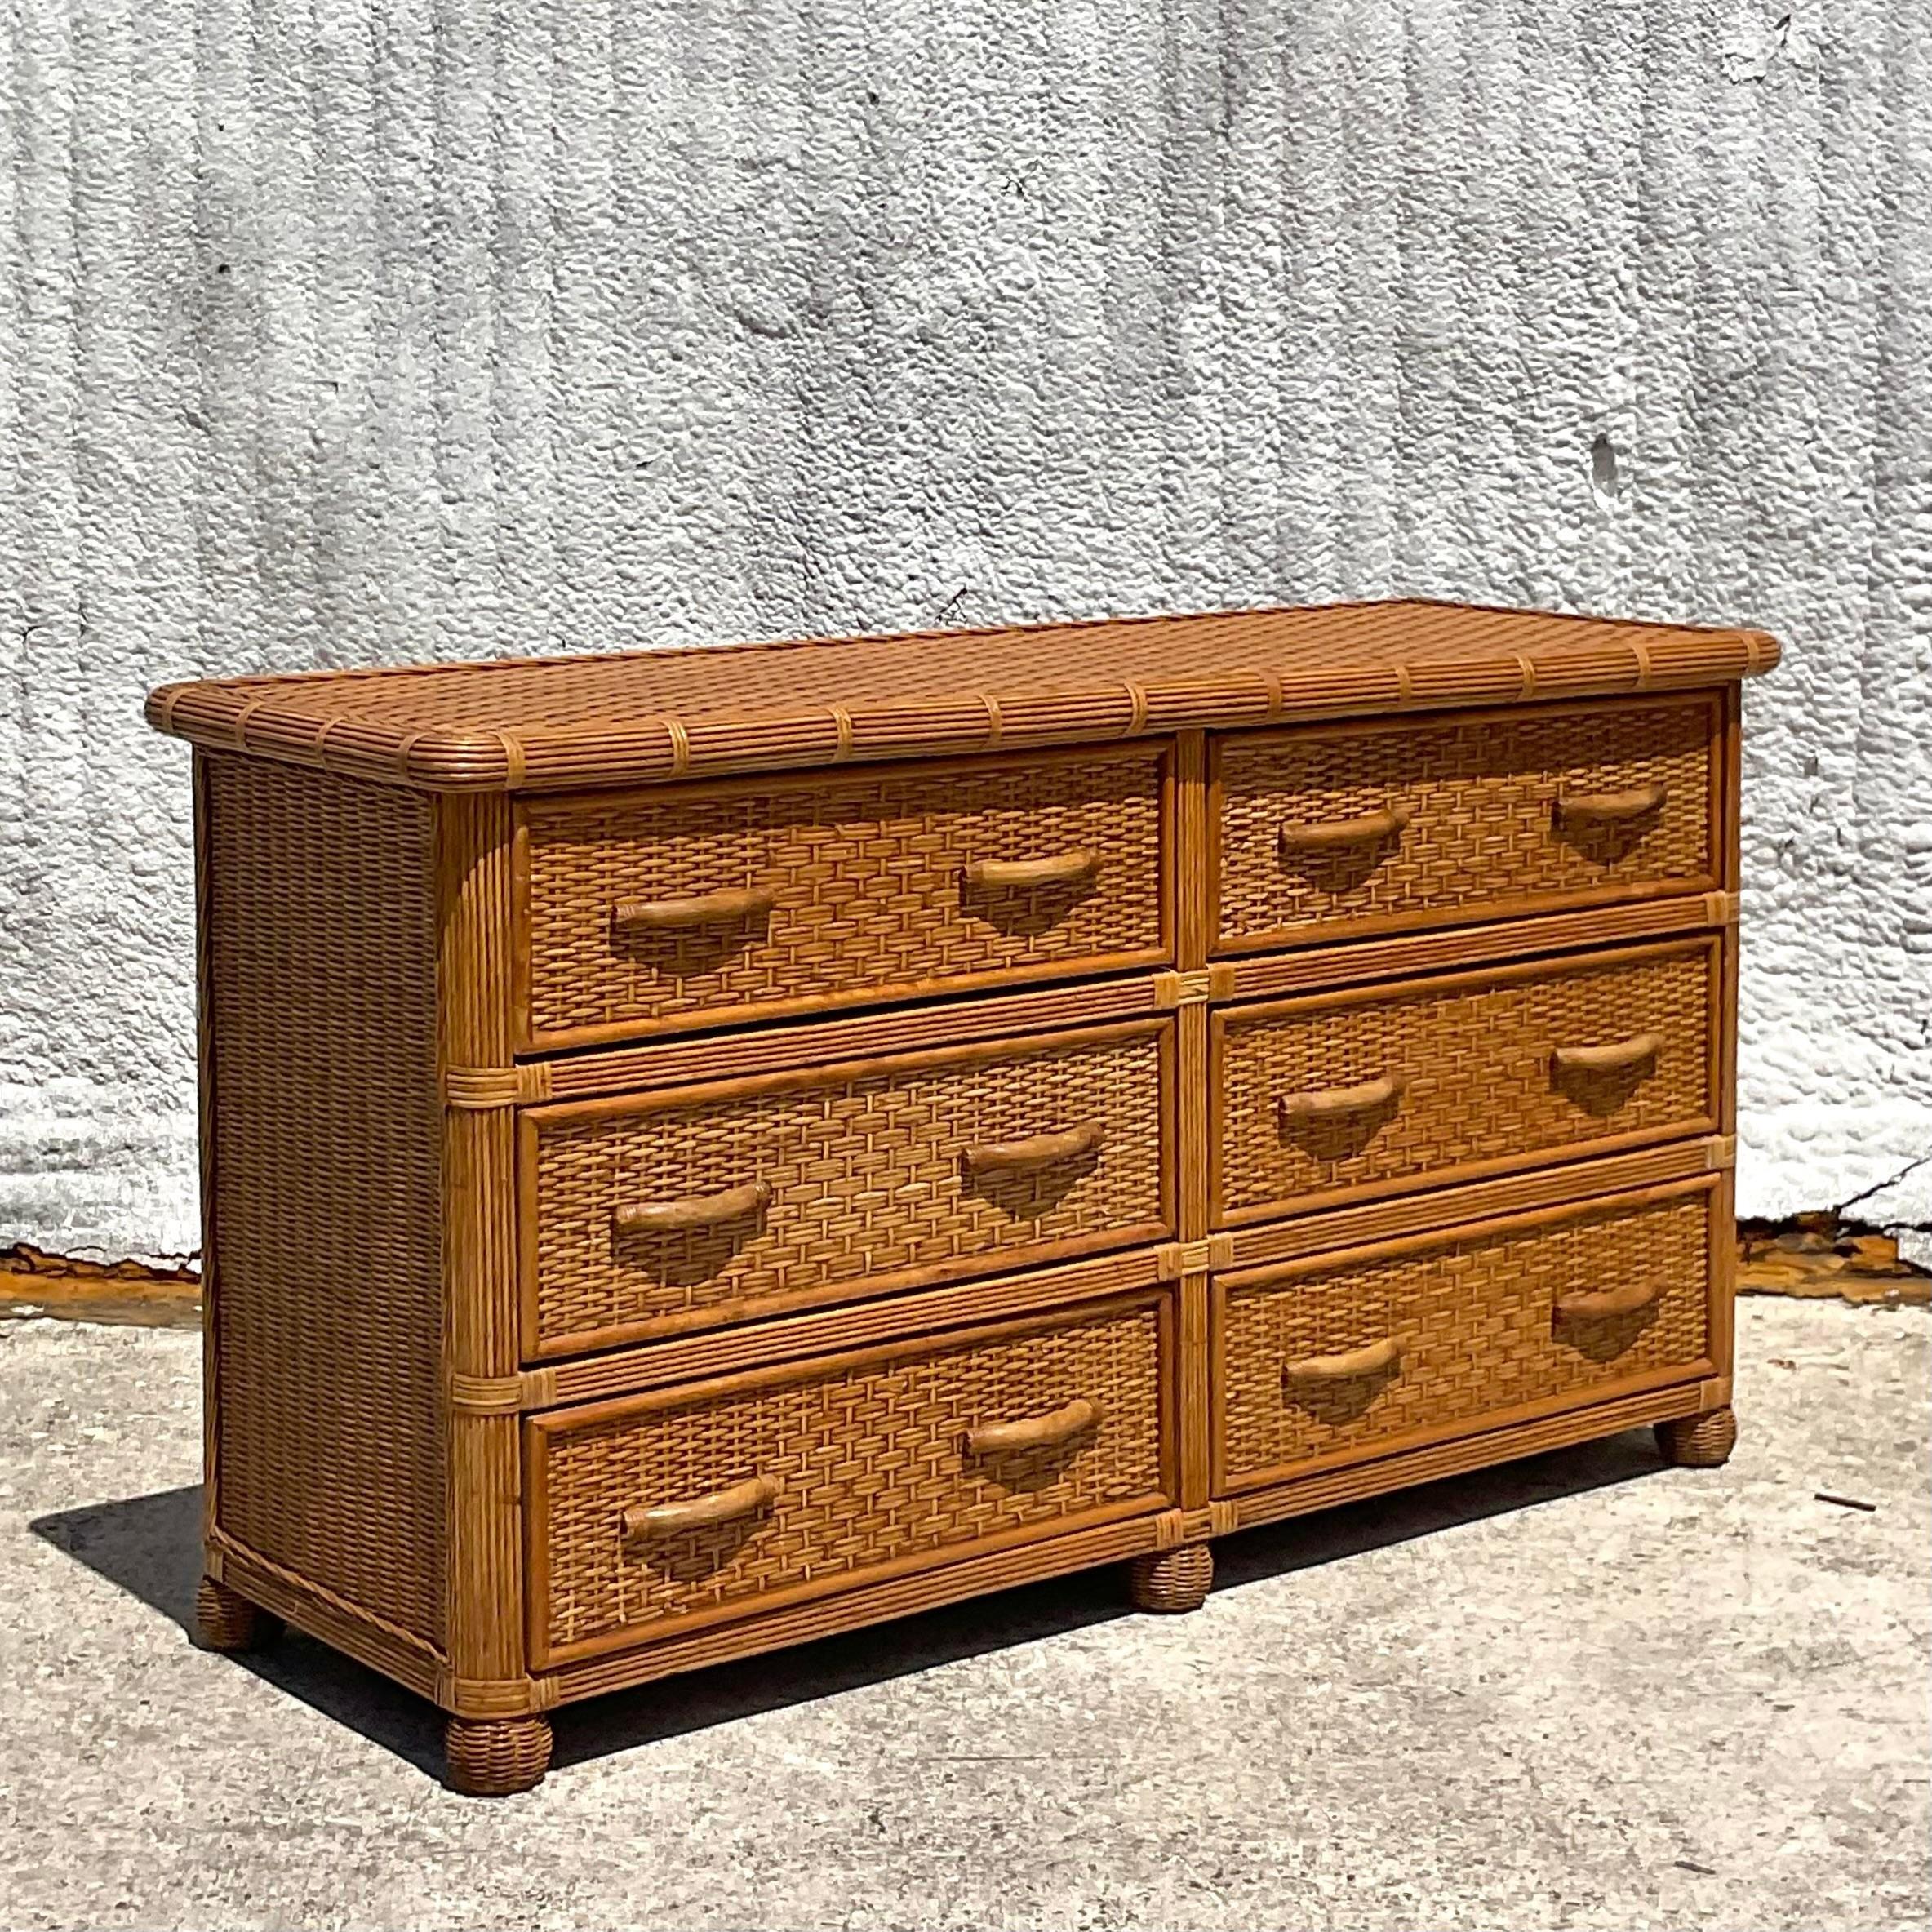 Bring coastal charm into your home with this Vintage Coastal Woven Rattan Dresser. Crafted with natural rattan and featuring a woven design, this dresser embodies the relaxed elegance of American coastal style. With ample storage and organic